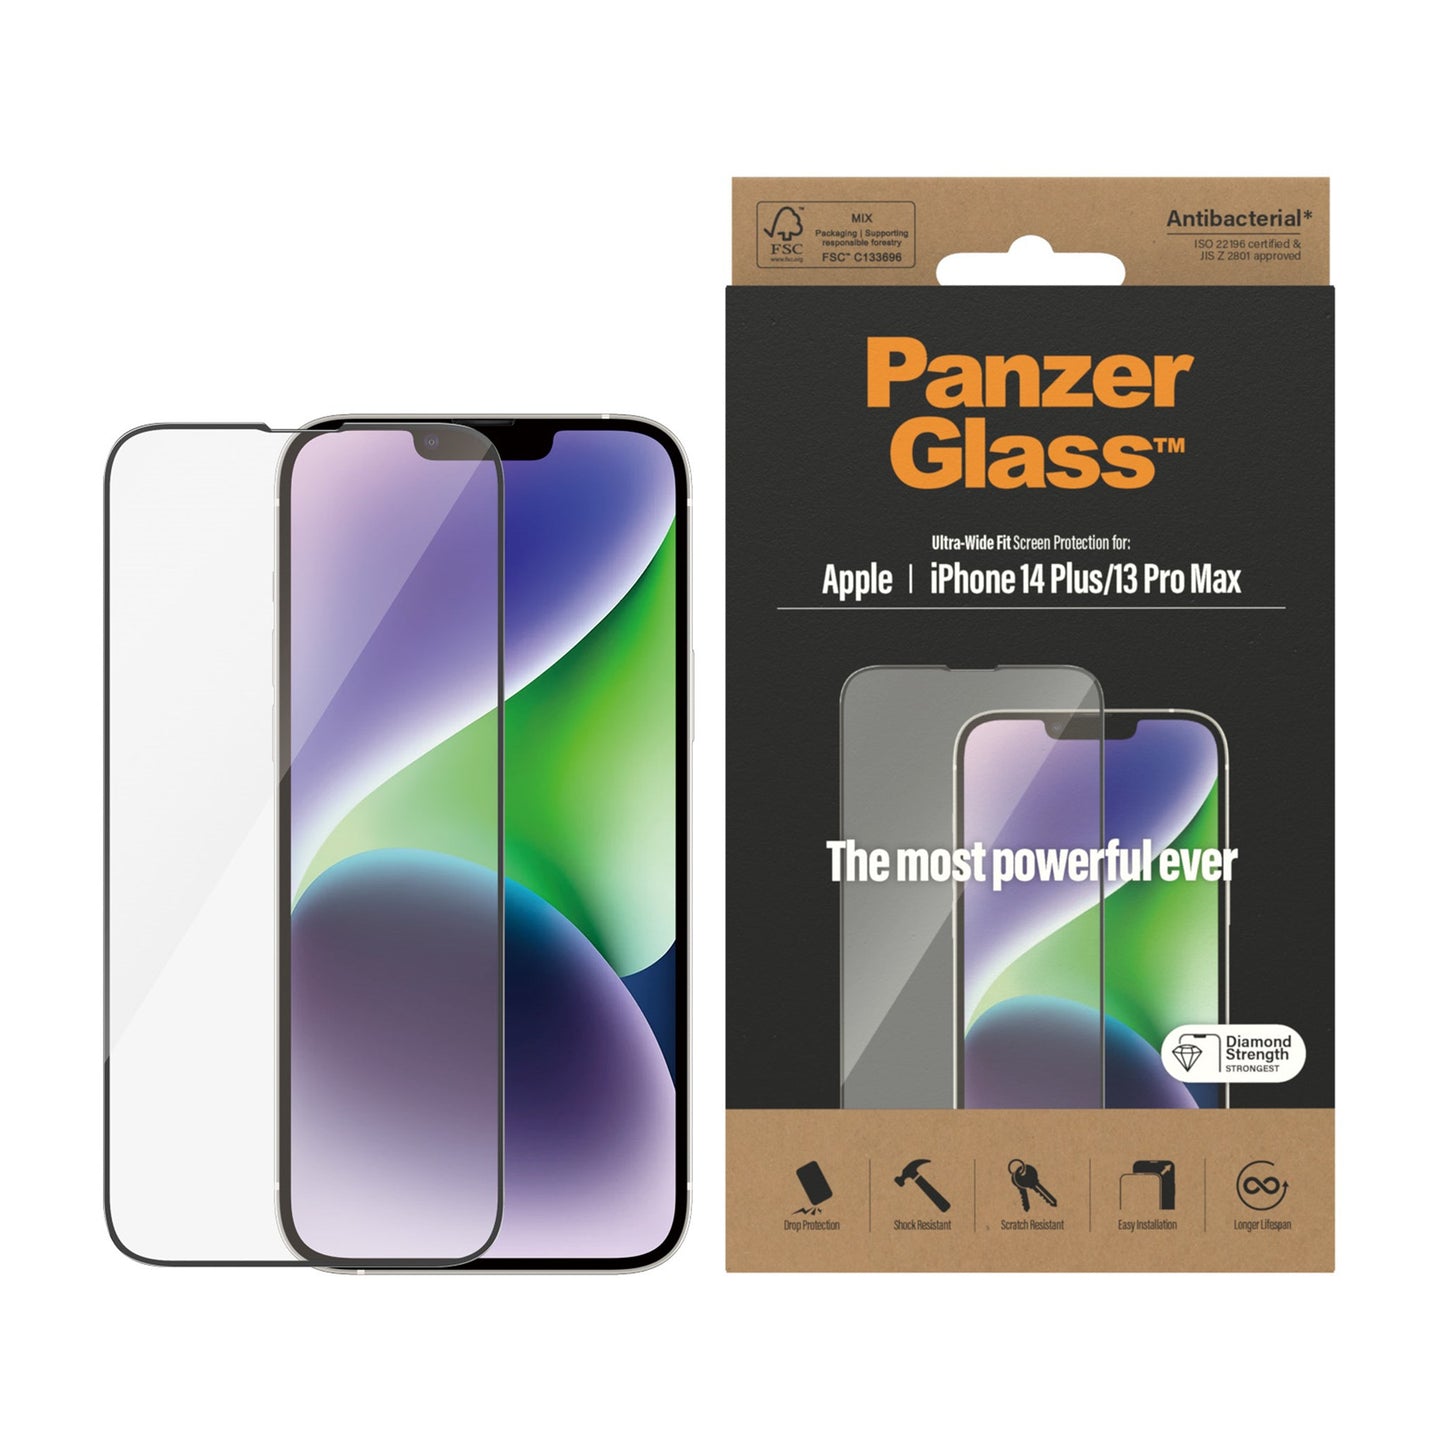 PanzerGlass™ Screen Protector Apple iPhone 14 Plus | 13 Pro Max | Ultra-Wide Fit 2